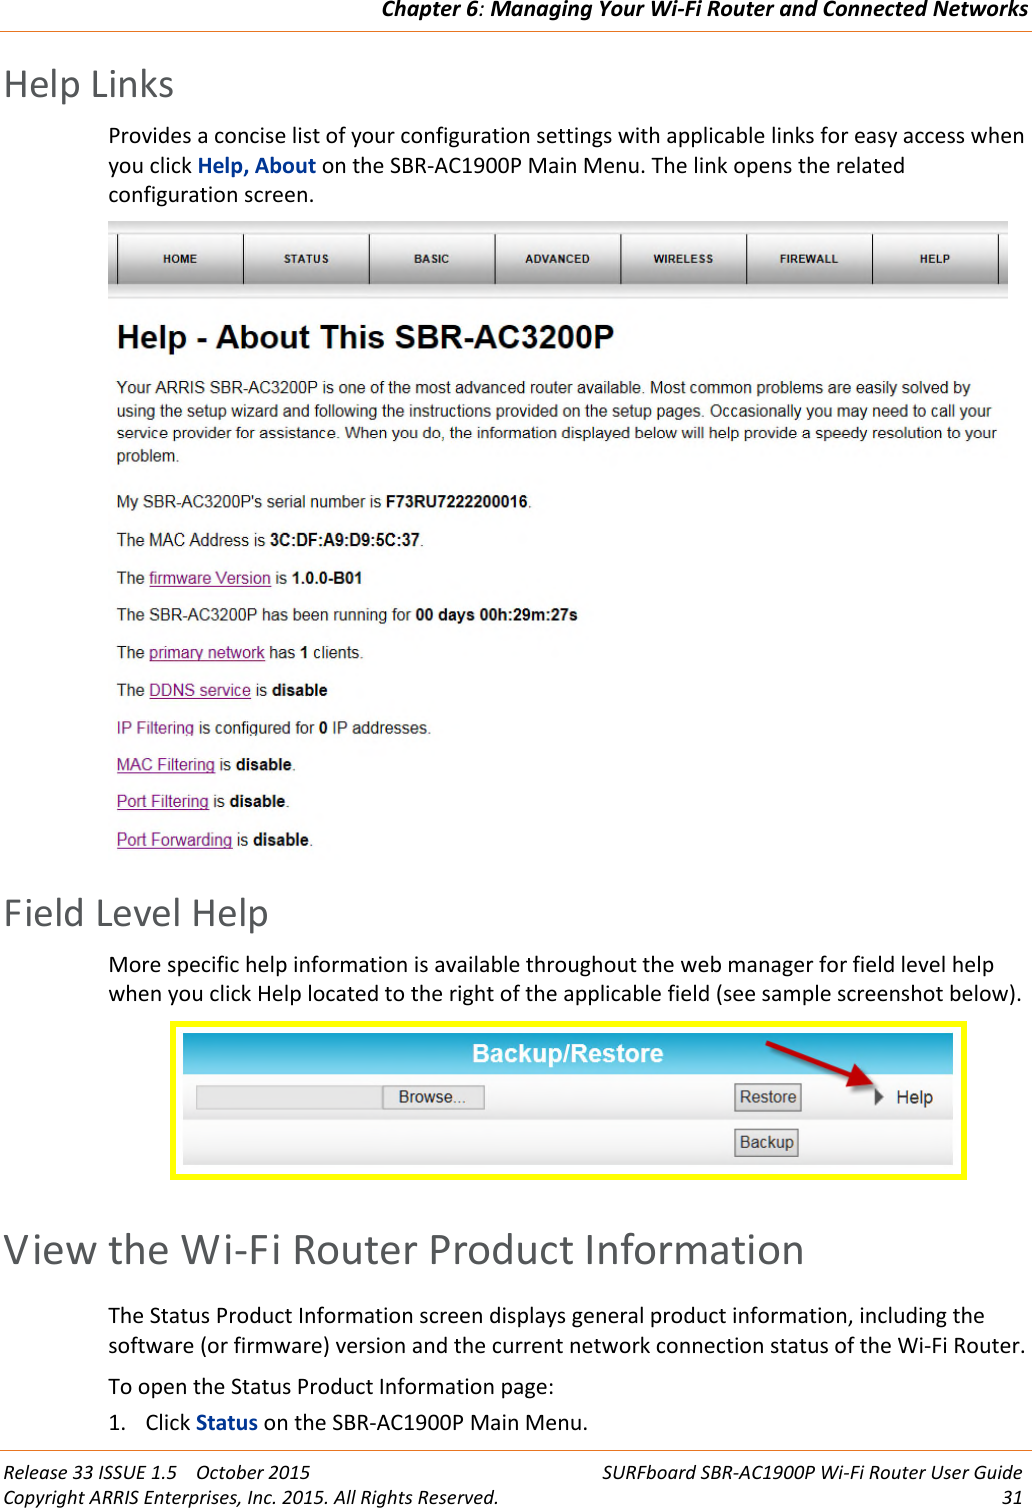 Chapter 6:Managing Your Wi-Fi Router and Connected NetworksRelease 33 ISSUE 1.5 October 2015 SURFboard SBR-AC1900P Wi-Fi Router User GuideCopyright ARRIS Enterprises, Inc. 2015. All Rights Reserved. 31Help LinksProvides a concise list of your configuration settings with applicable links for easy access whenyou click Help, About on the SBR-AC1900P Main Menu. The link opens the relatedconfiguration screen.Field Level HelpMore specific help information is available throughout the web manager for field level helpwhen you click Help located to the right of the applicable field (see sample screenshot below).View the Wi-Fi Router Product InformationThe Status Product Information screen displays general product information, including thesoftware (or firmware) version and the current network connection status of the Wi-Fi Router.To open the Status Product Information page:1. Click Status on the SBR-AC1900P Main Menu.